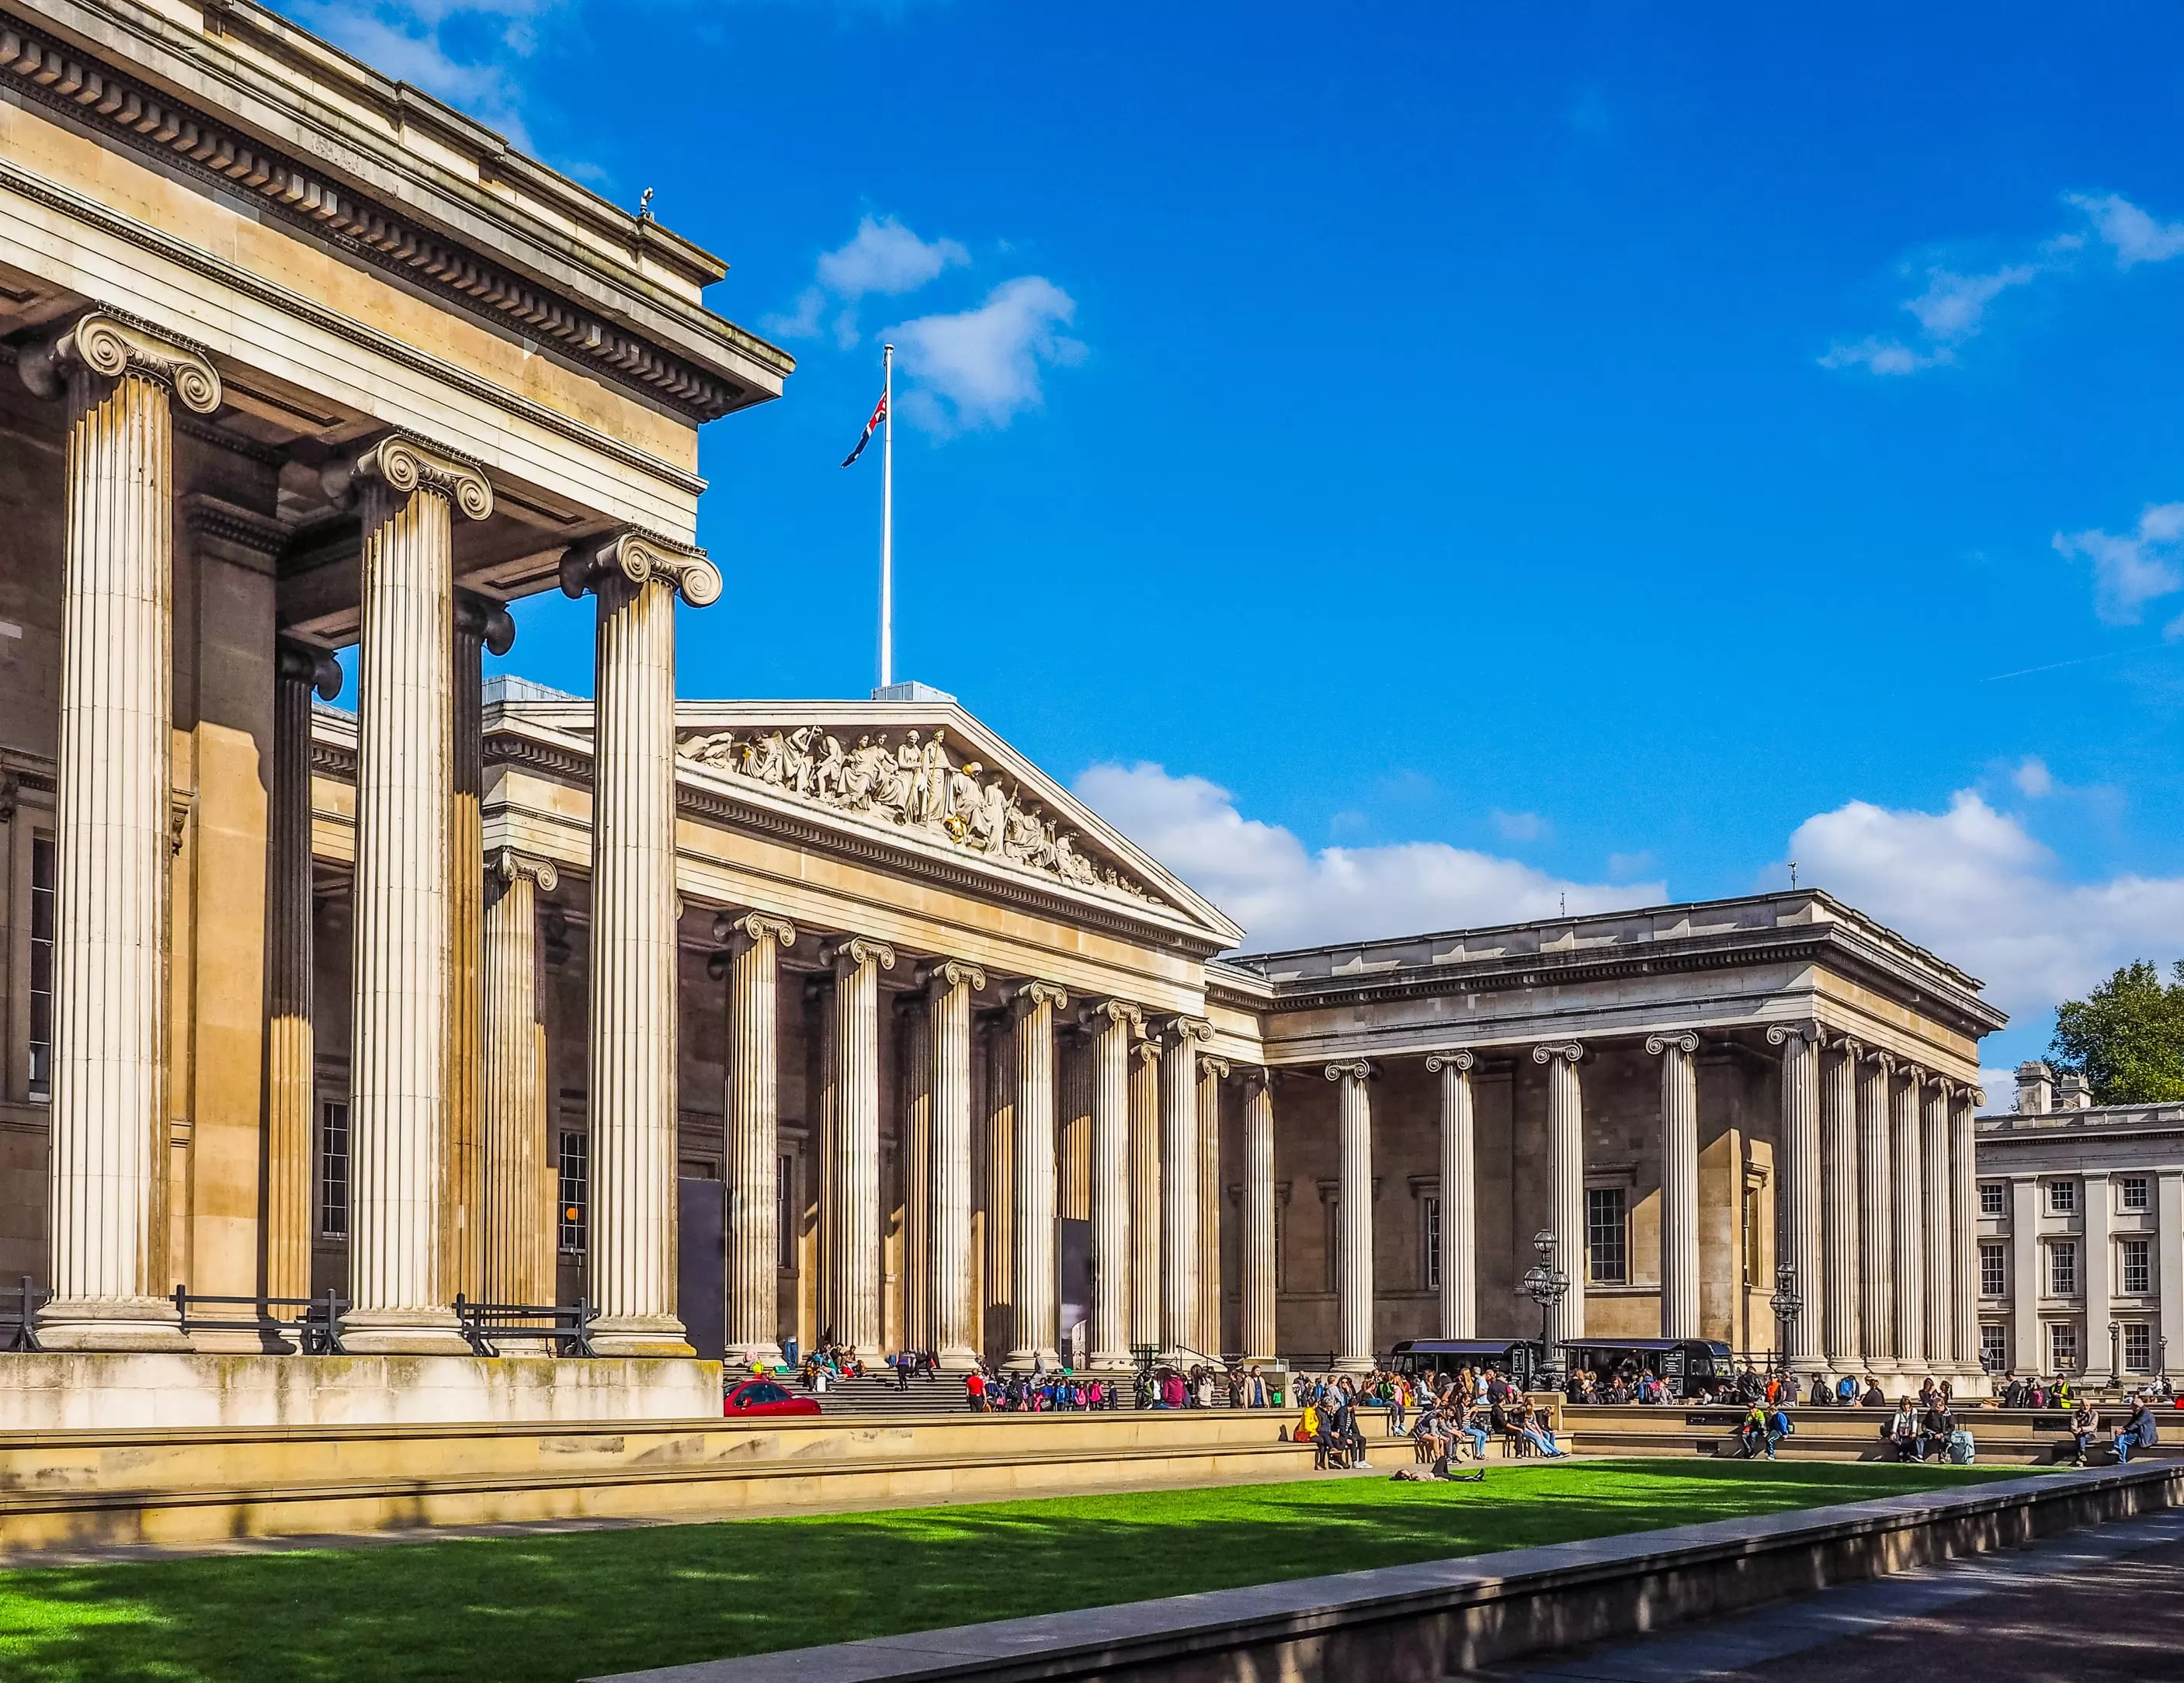 A daytime photo of the entrance to the British Museum